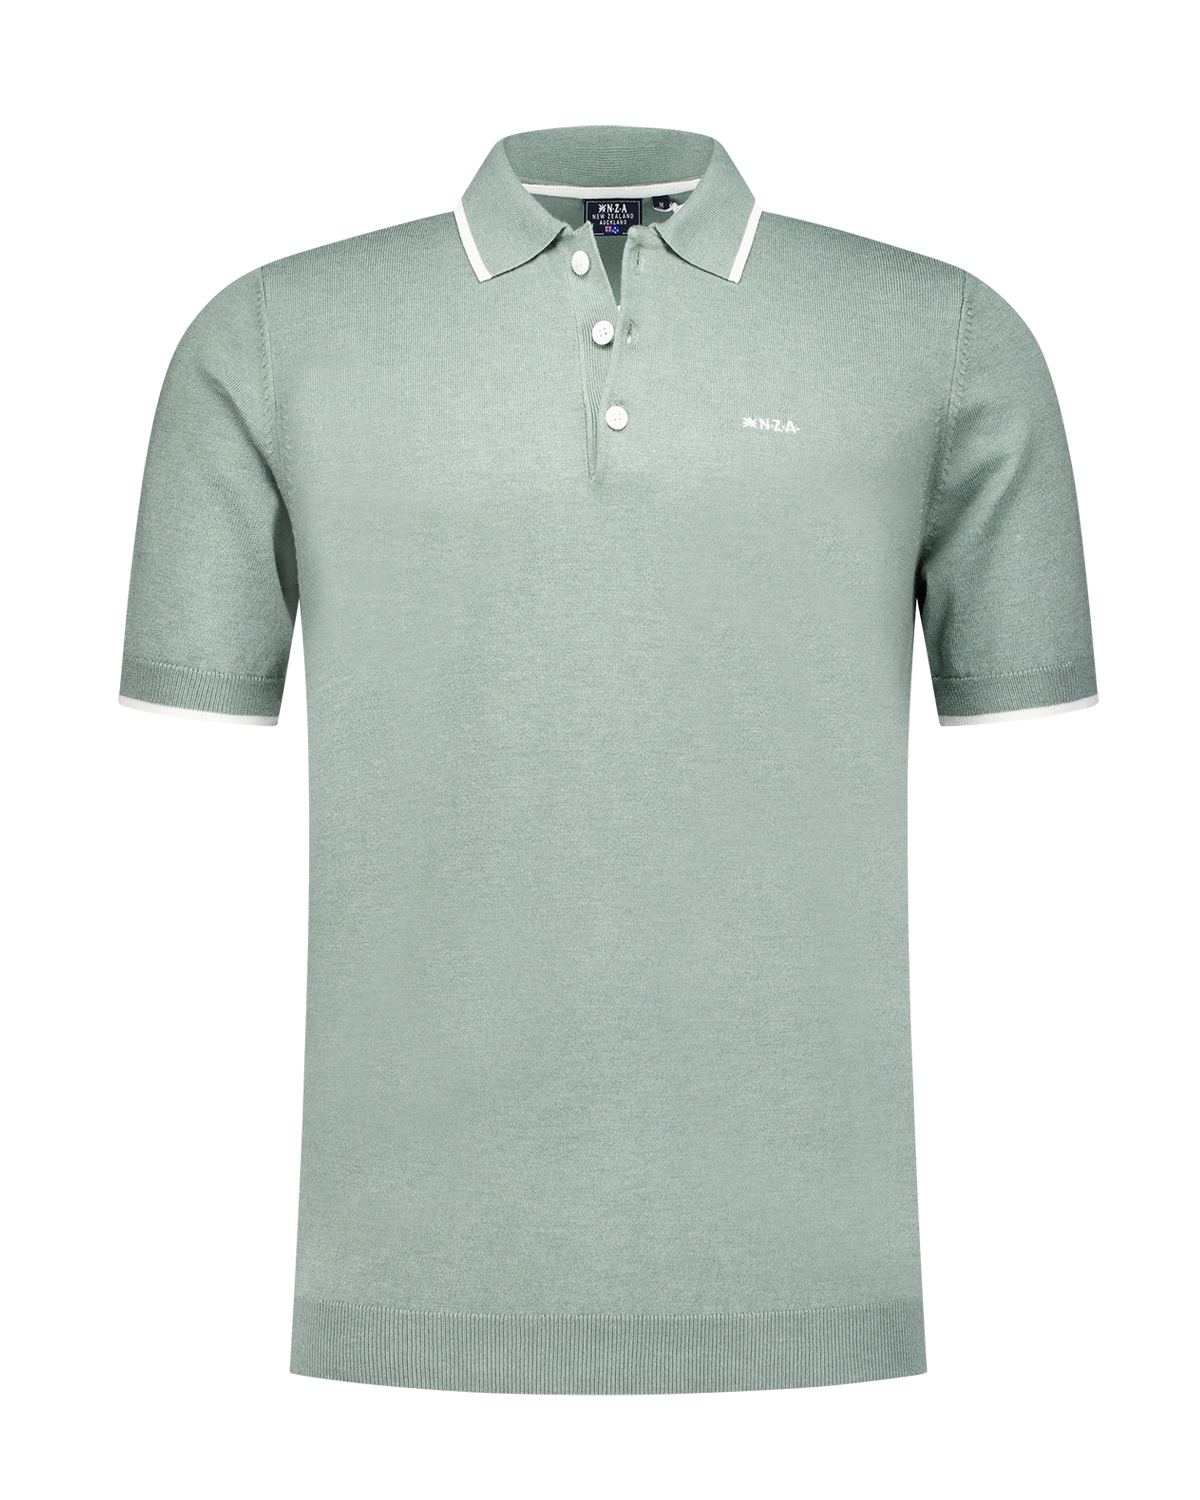 Green polo with white details - Sage